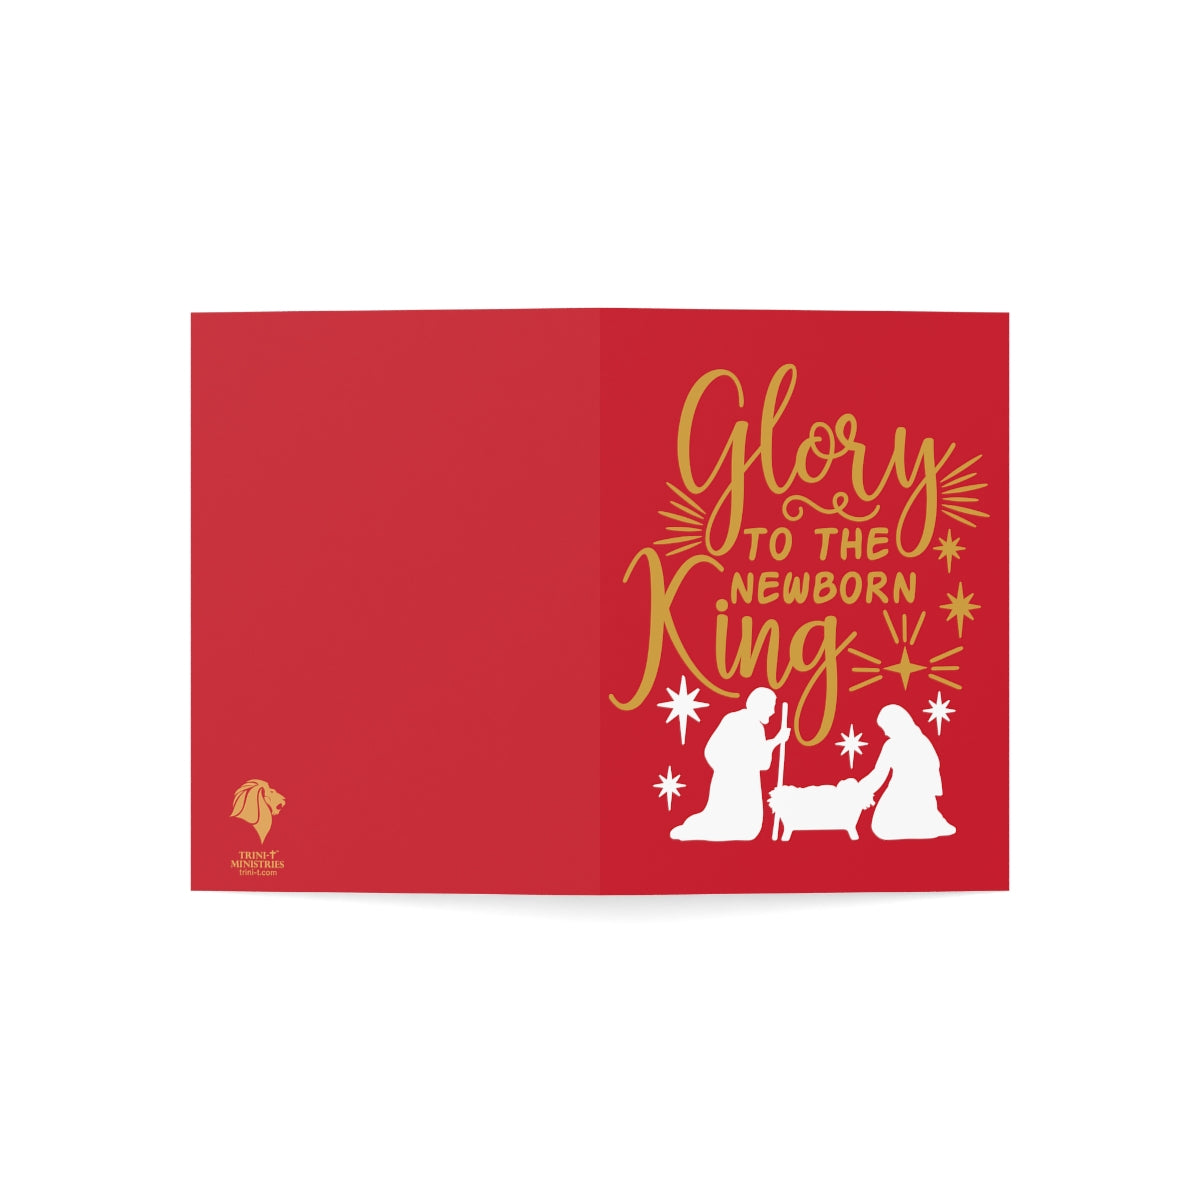 Glory to the King -  Greeting Cards (1, 10, 30, and 50pcs)